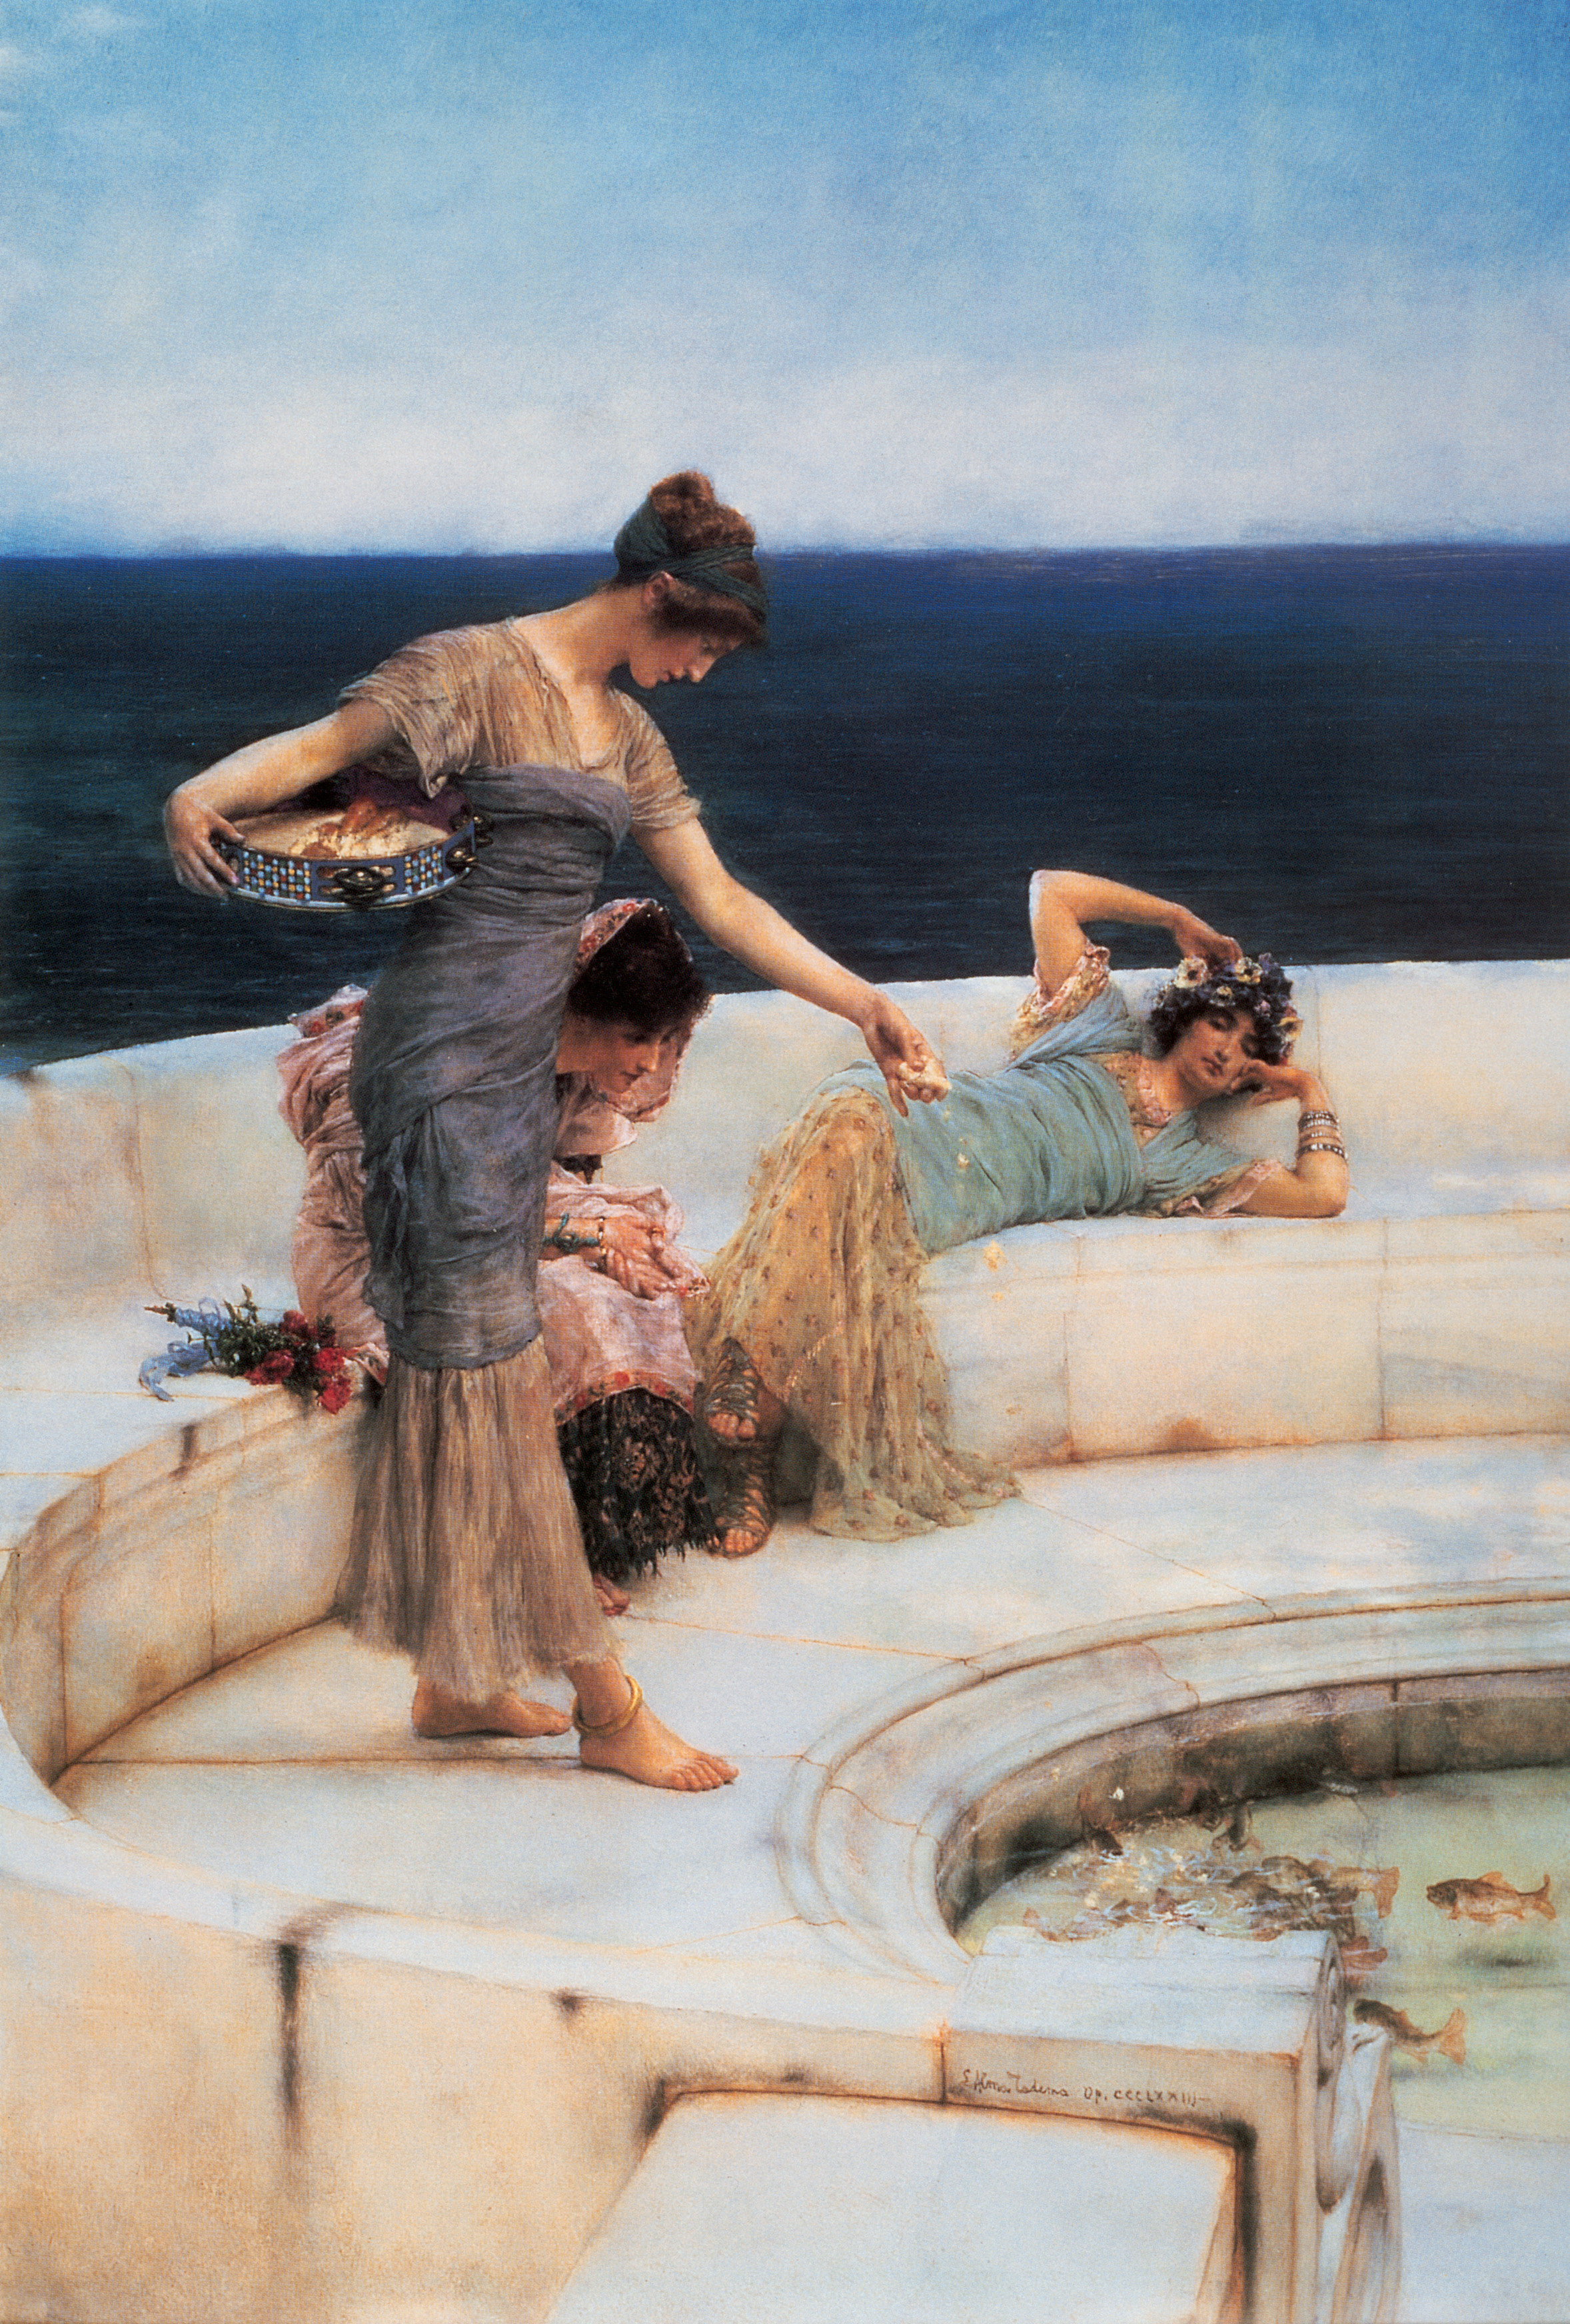 Silver Favourites by Lawrence Alma-Tadema - 1903 - 69.1 x 42.2 cm Manchester Art Gallery